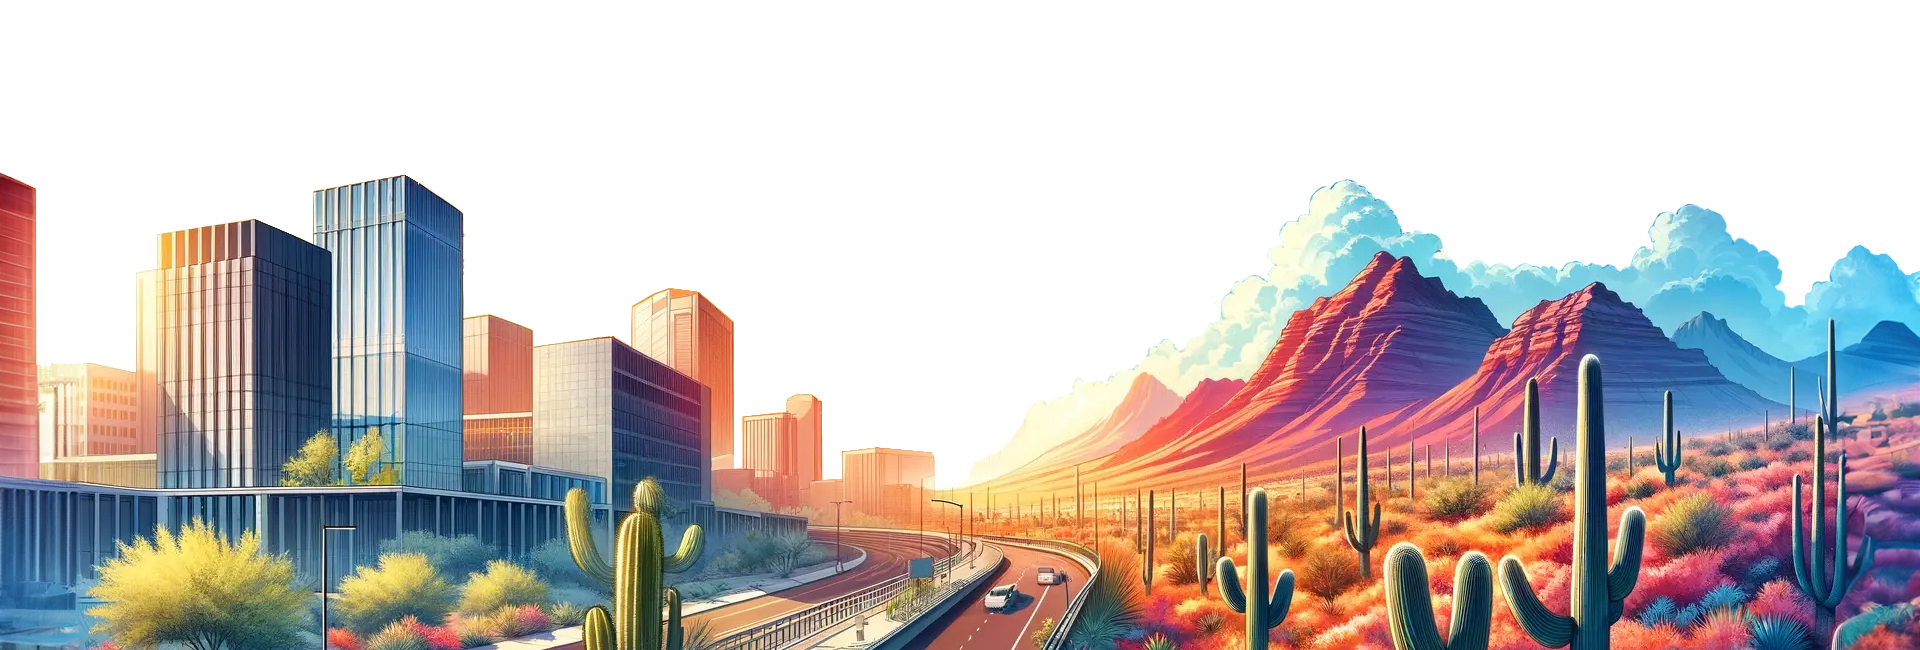 Illustration of a bustling city transitioning into a desert landscape with cacti, mountains, and a highway under a vibrant sunrise.